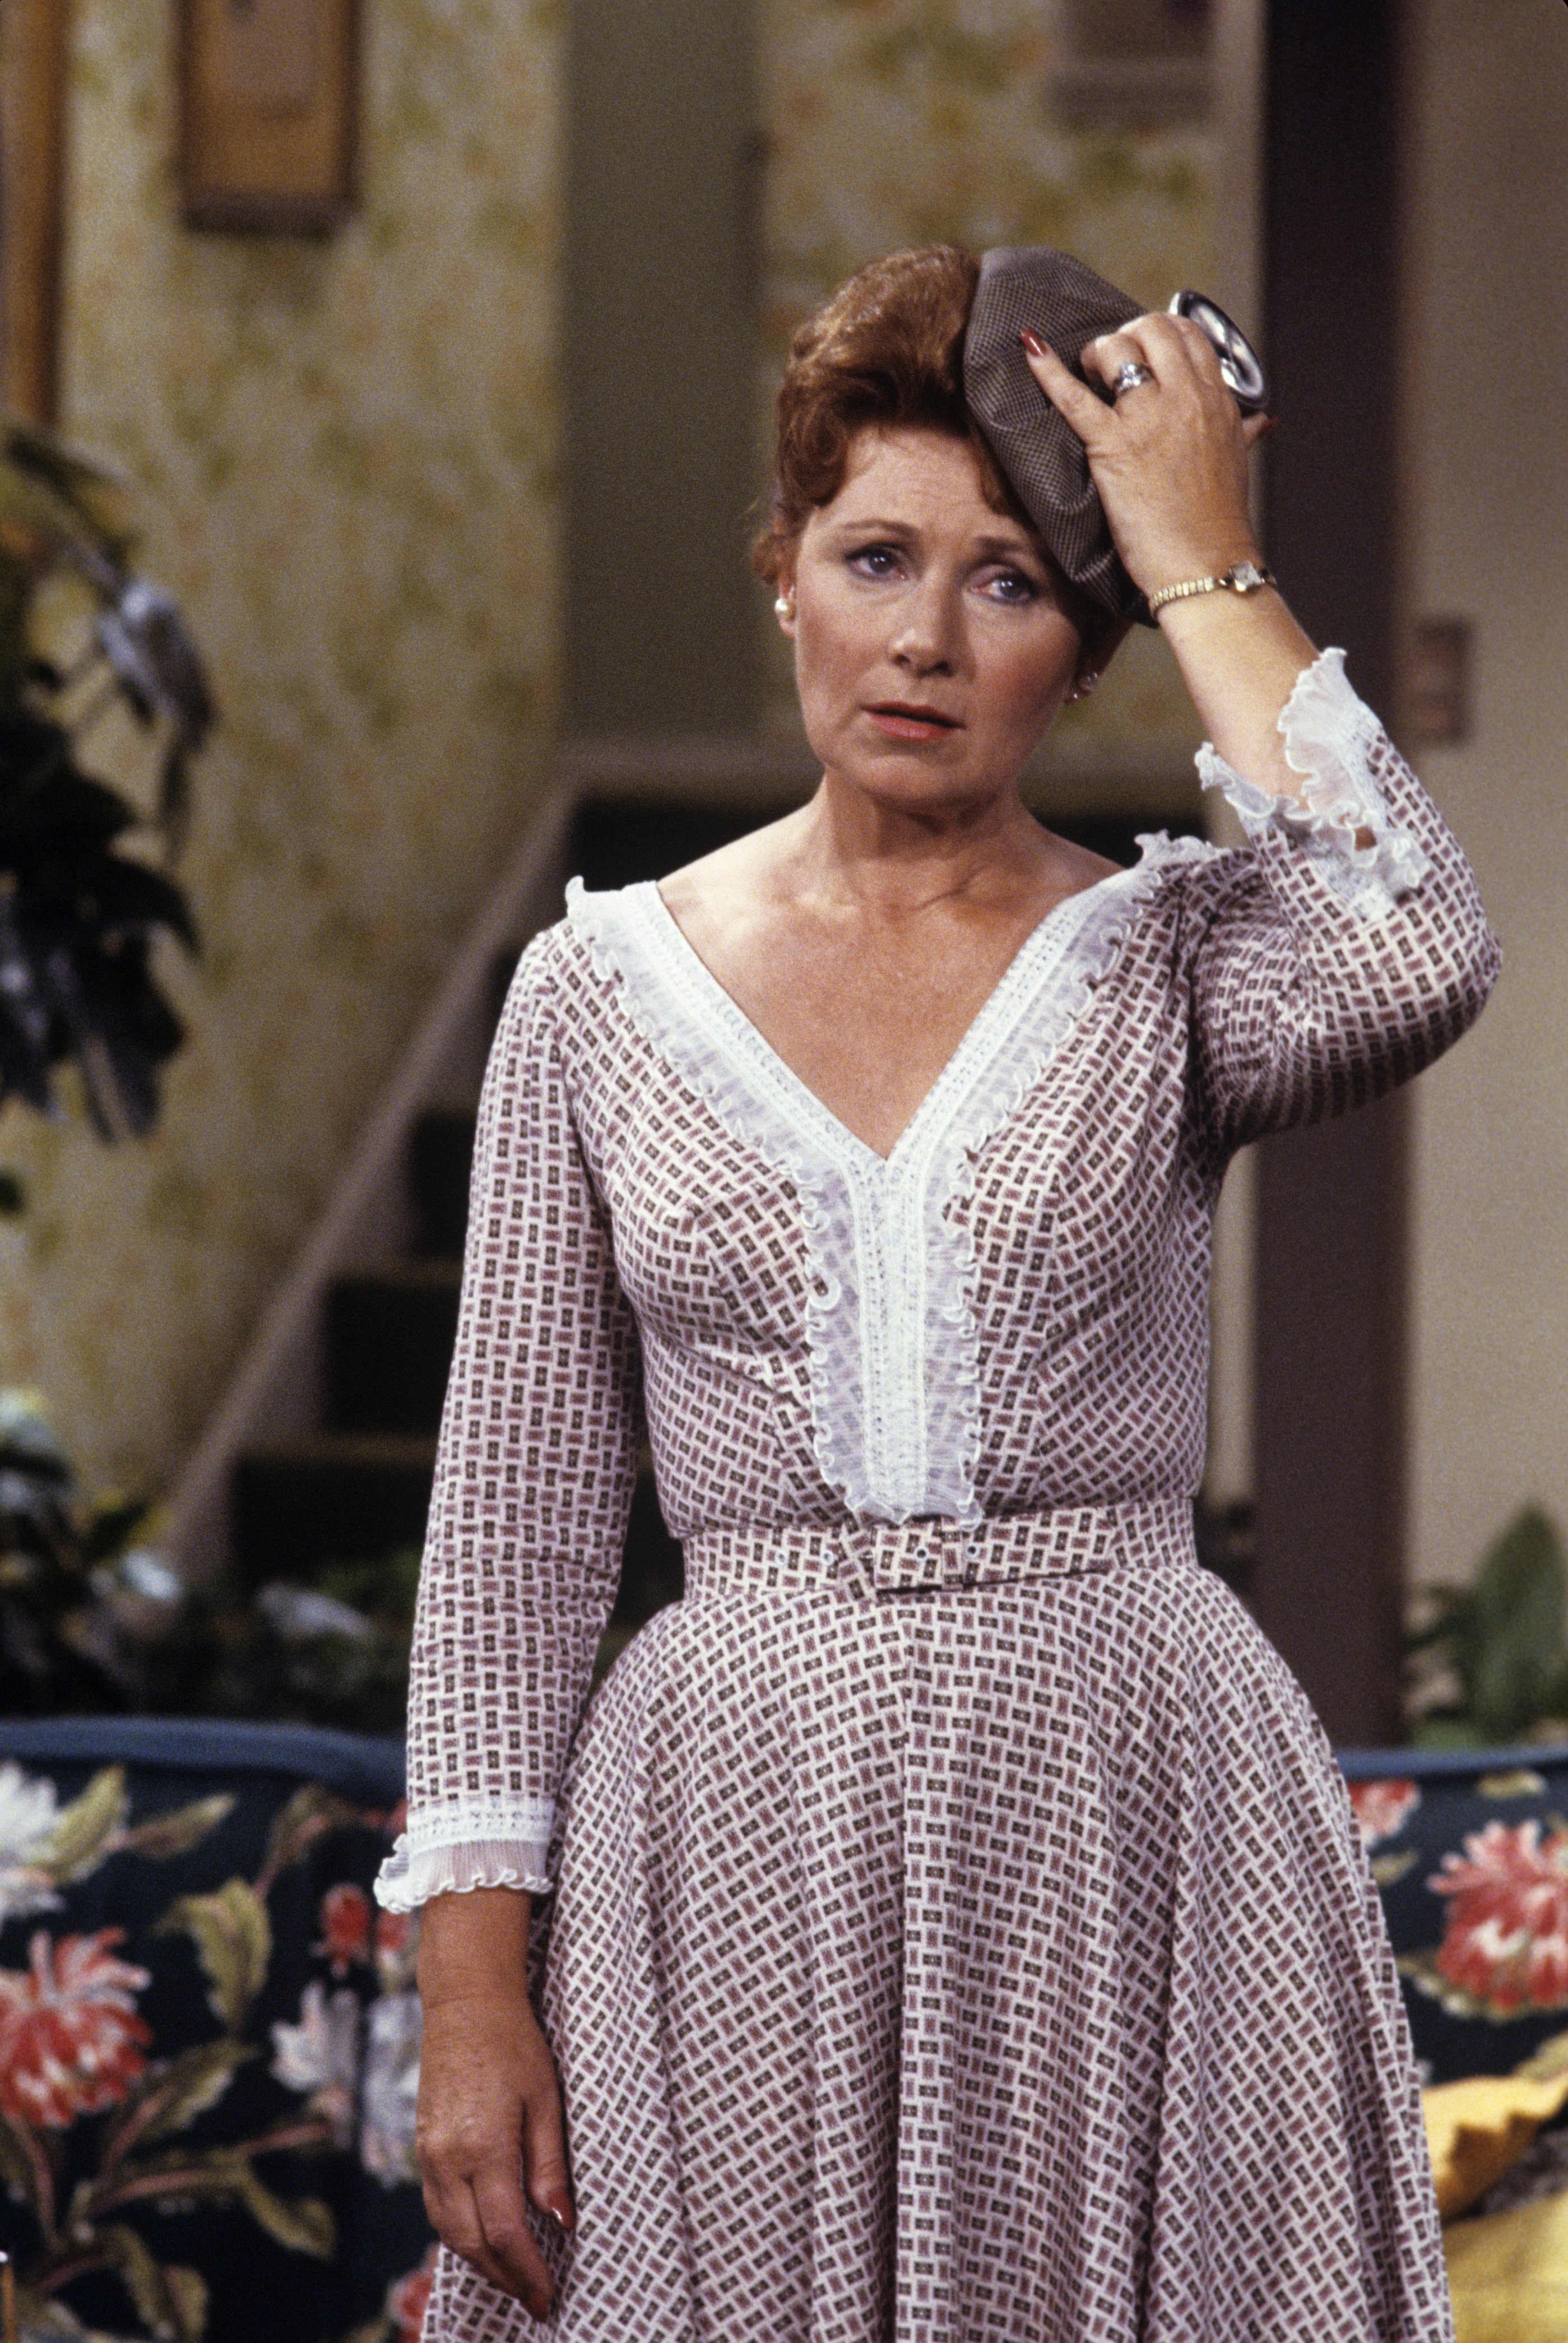 Hollywood starlet Marion Ross as Marion Cunningham on "Happy Days" in November 1980 | Source: Getty Images